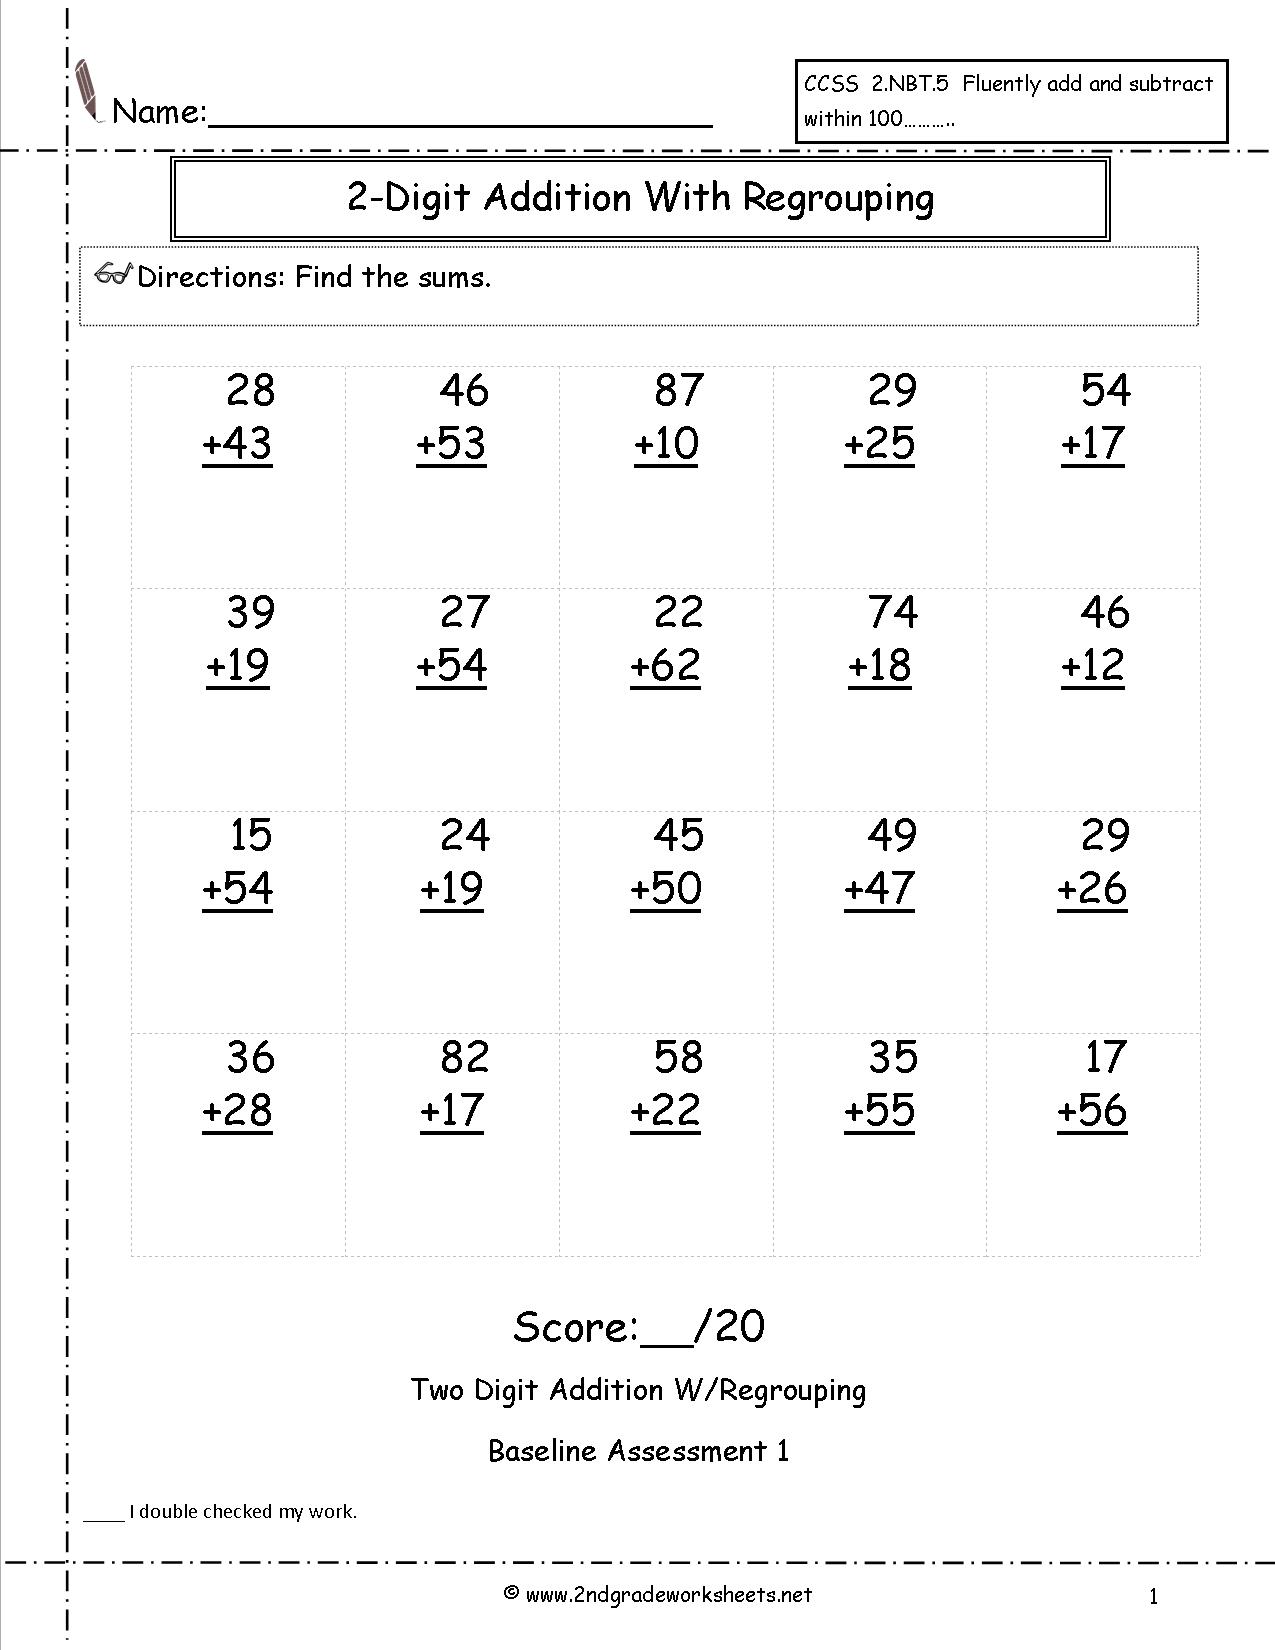 17 Best Images of Three- Digit Addition Worksheets - Three-Digit